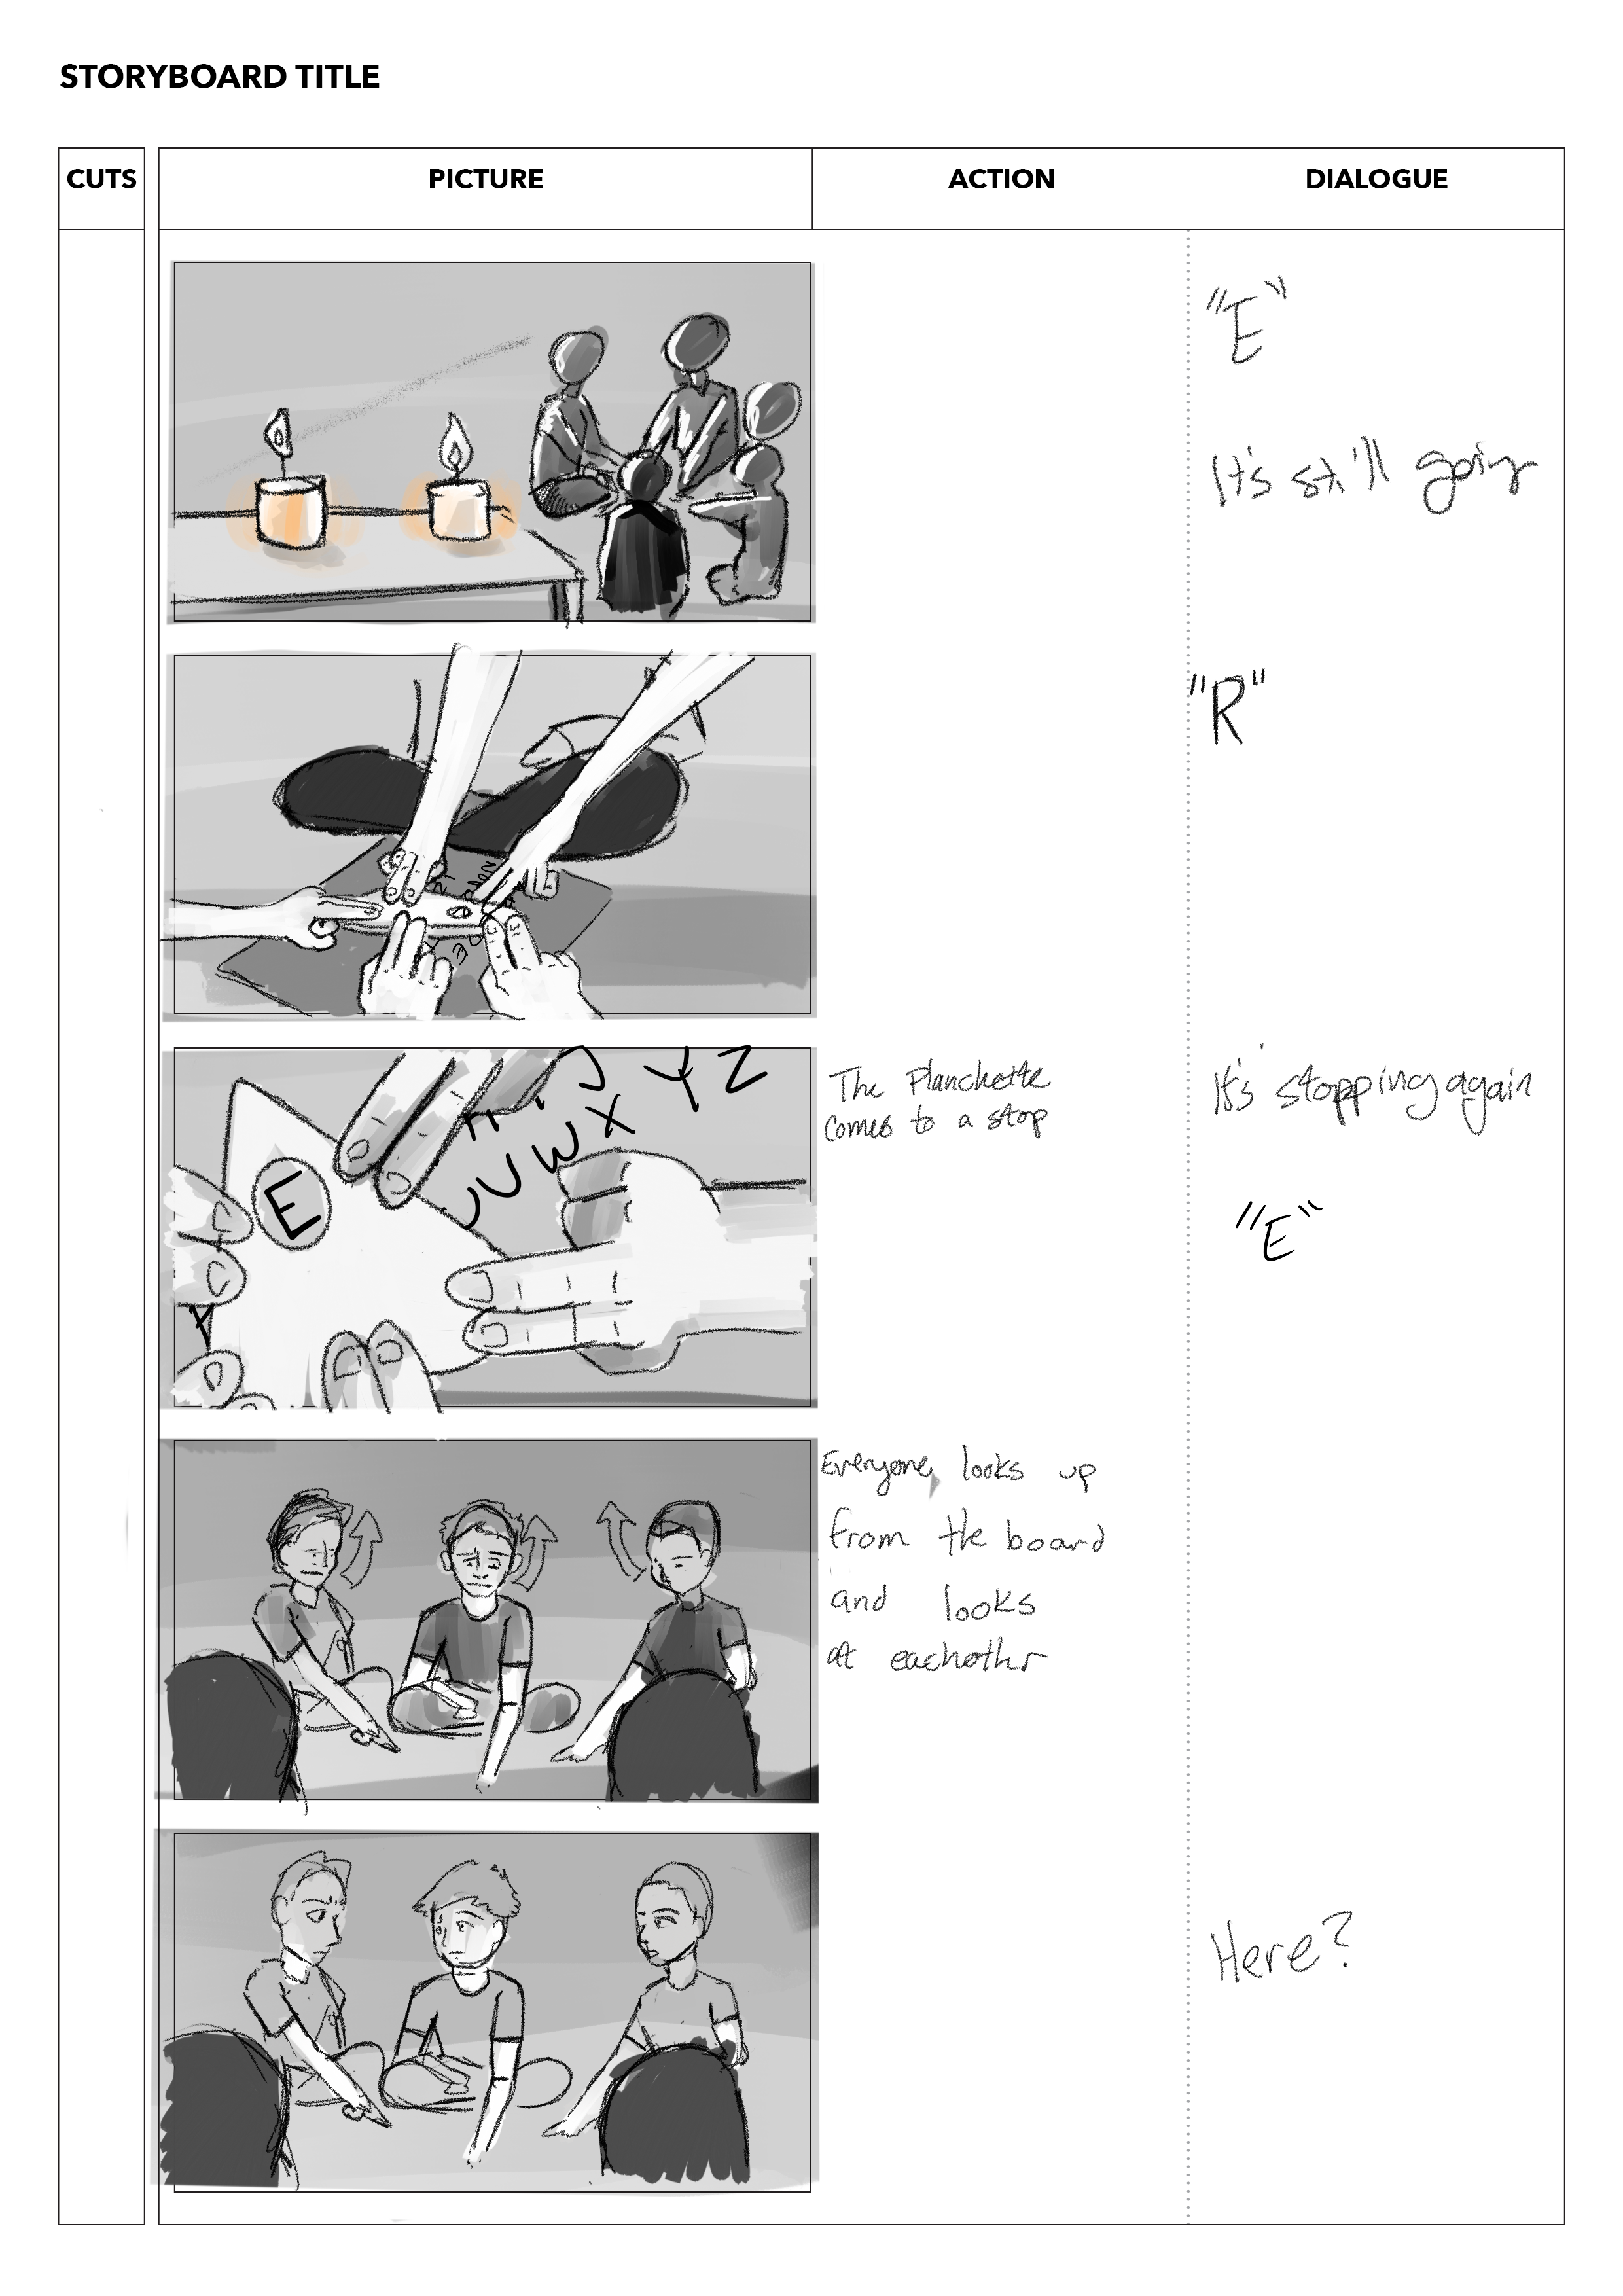 16_9_Storyboard_Template_page 4.png